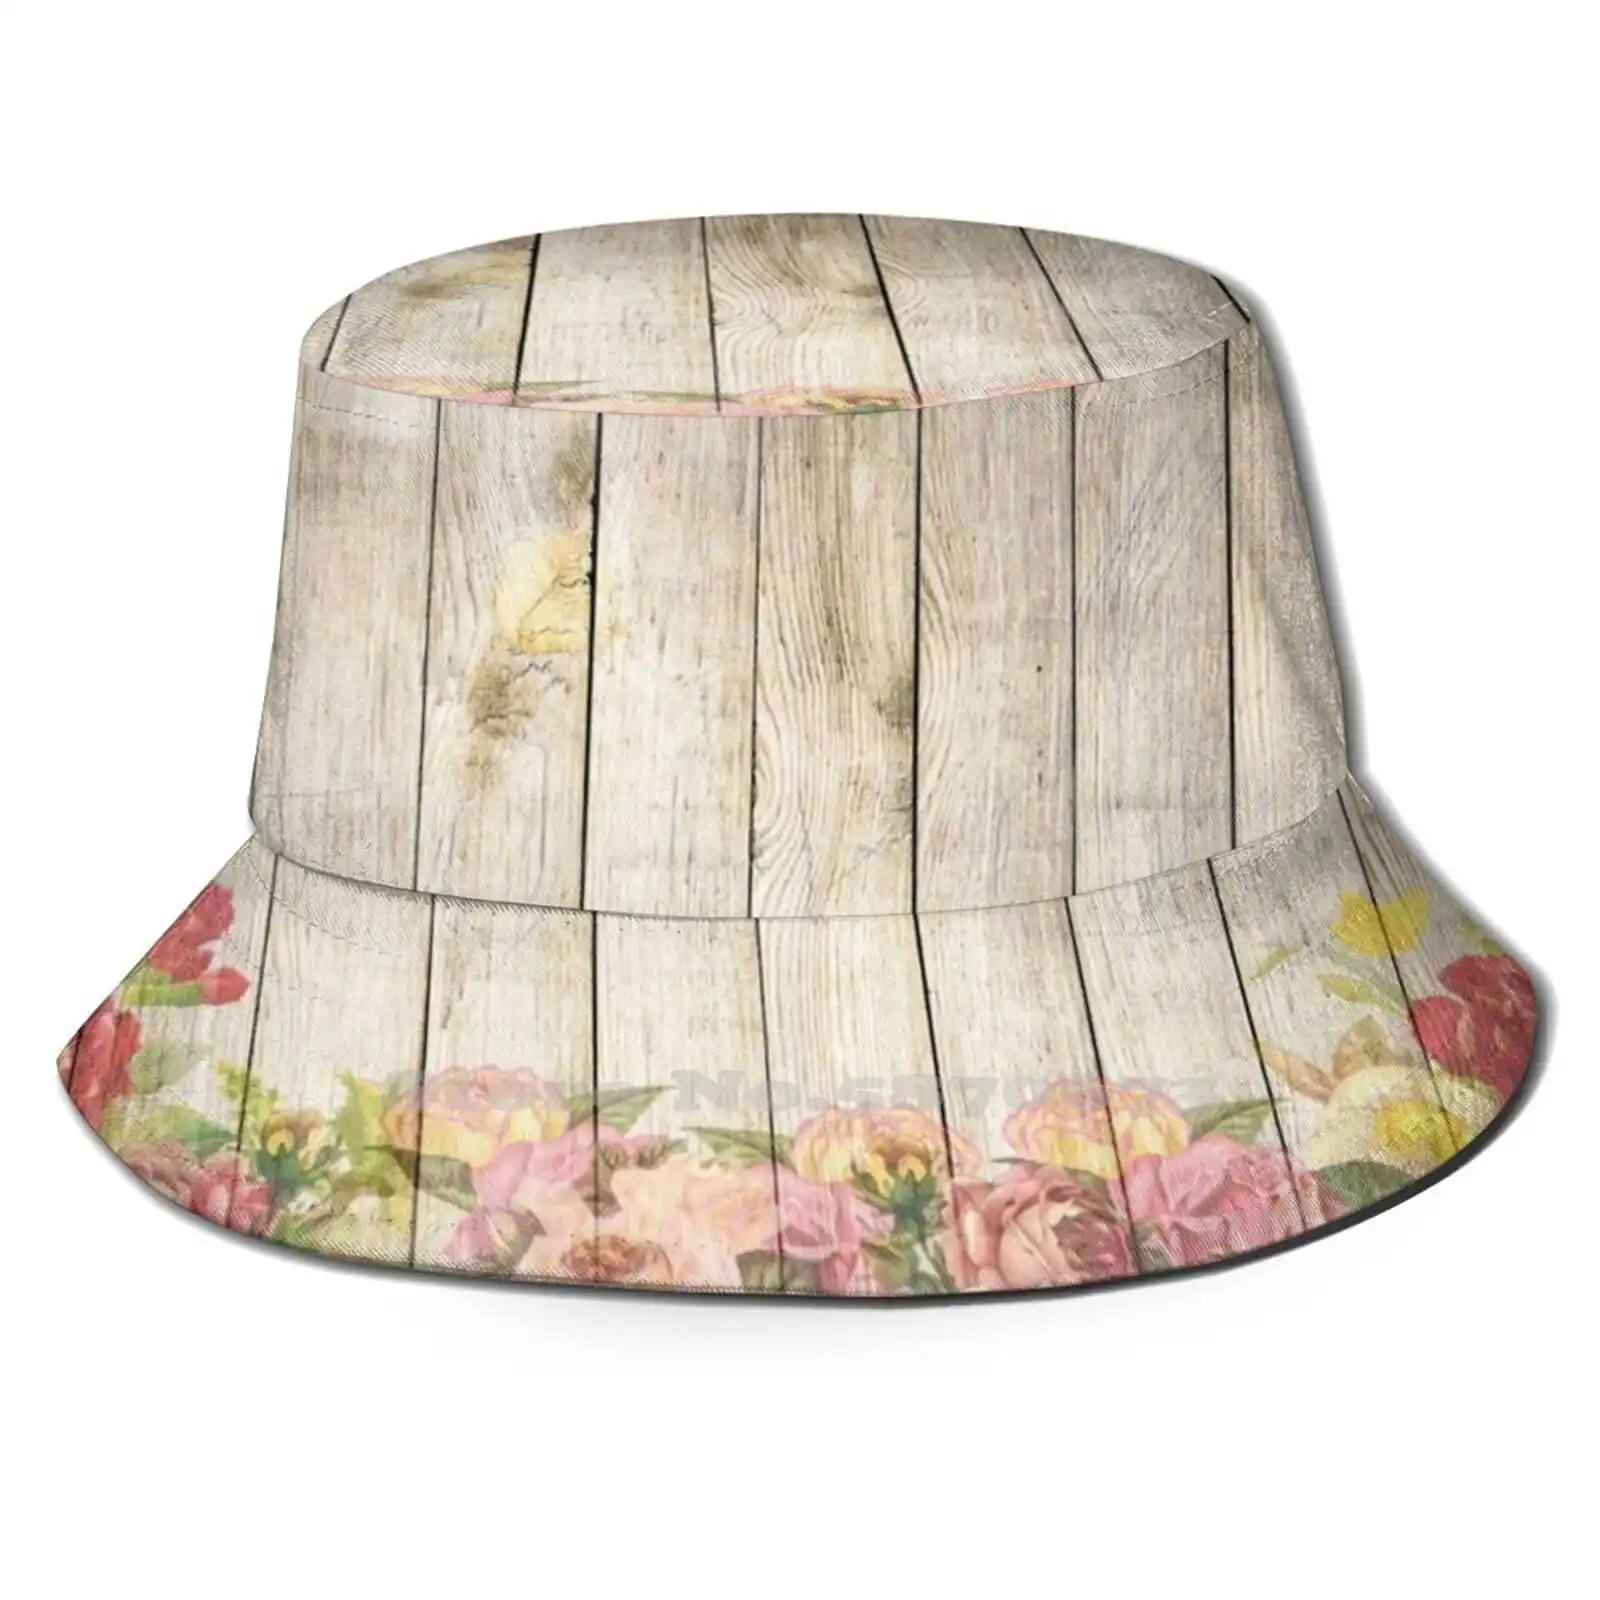 

Romantic Rose Wood Wall Design Pattern Design Printed Travel Bucket Hats Romantic Roses Wooden Wall Vintage Country House